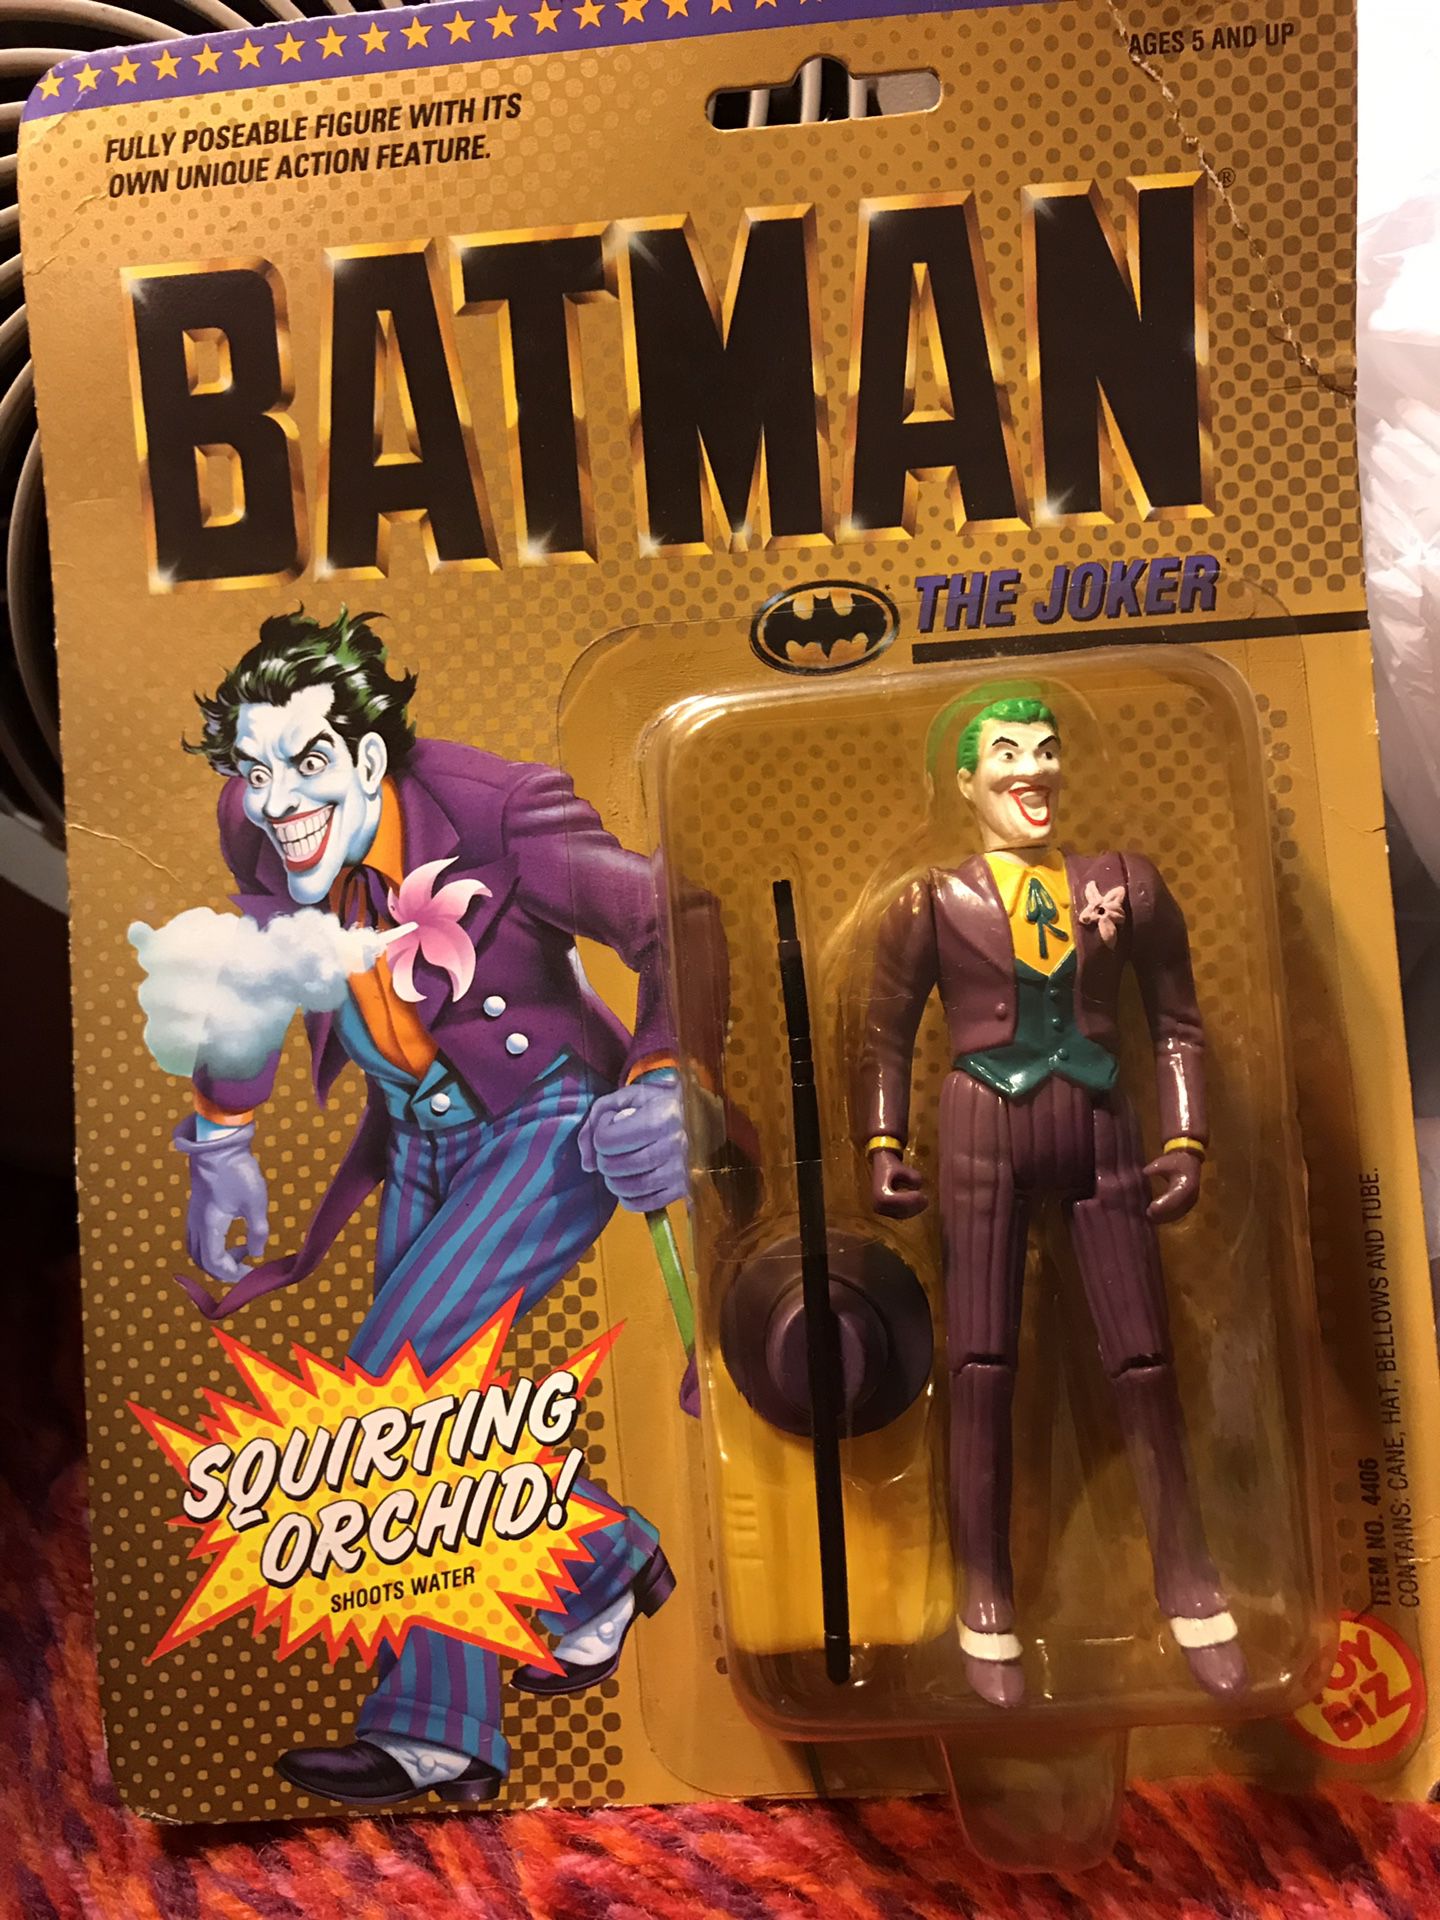 1989 The Joker Fully Posable Figure from Toy Biz NEW in box